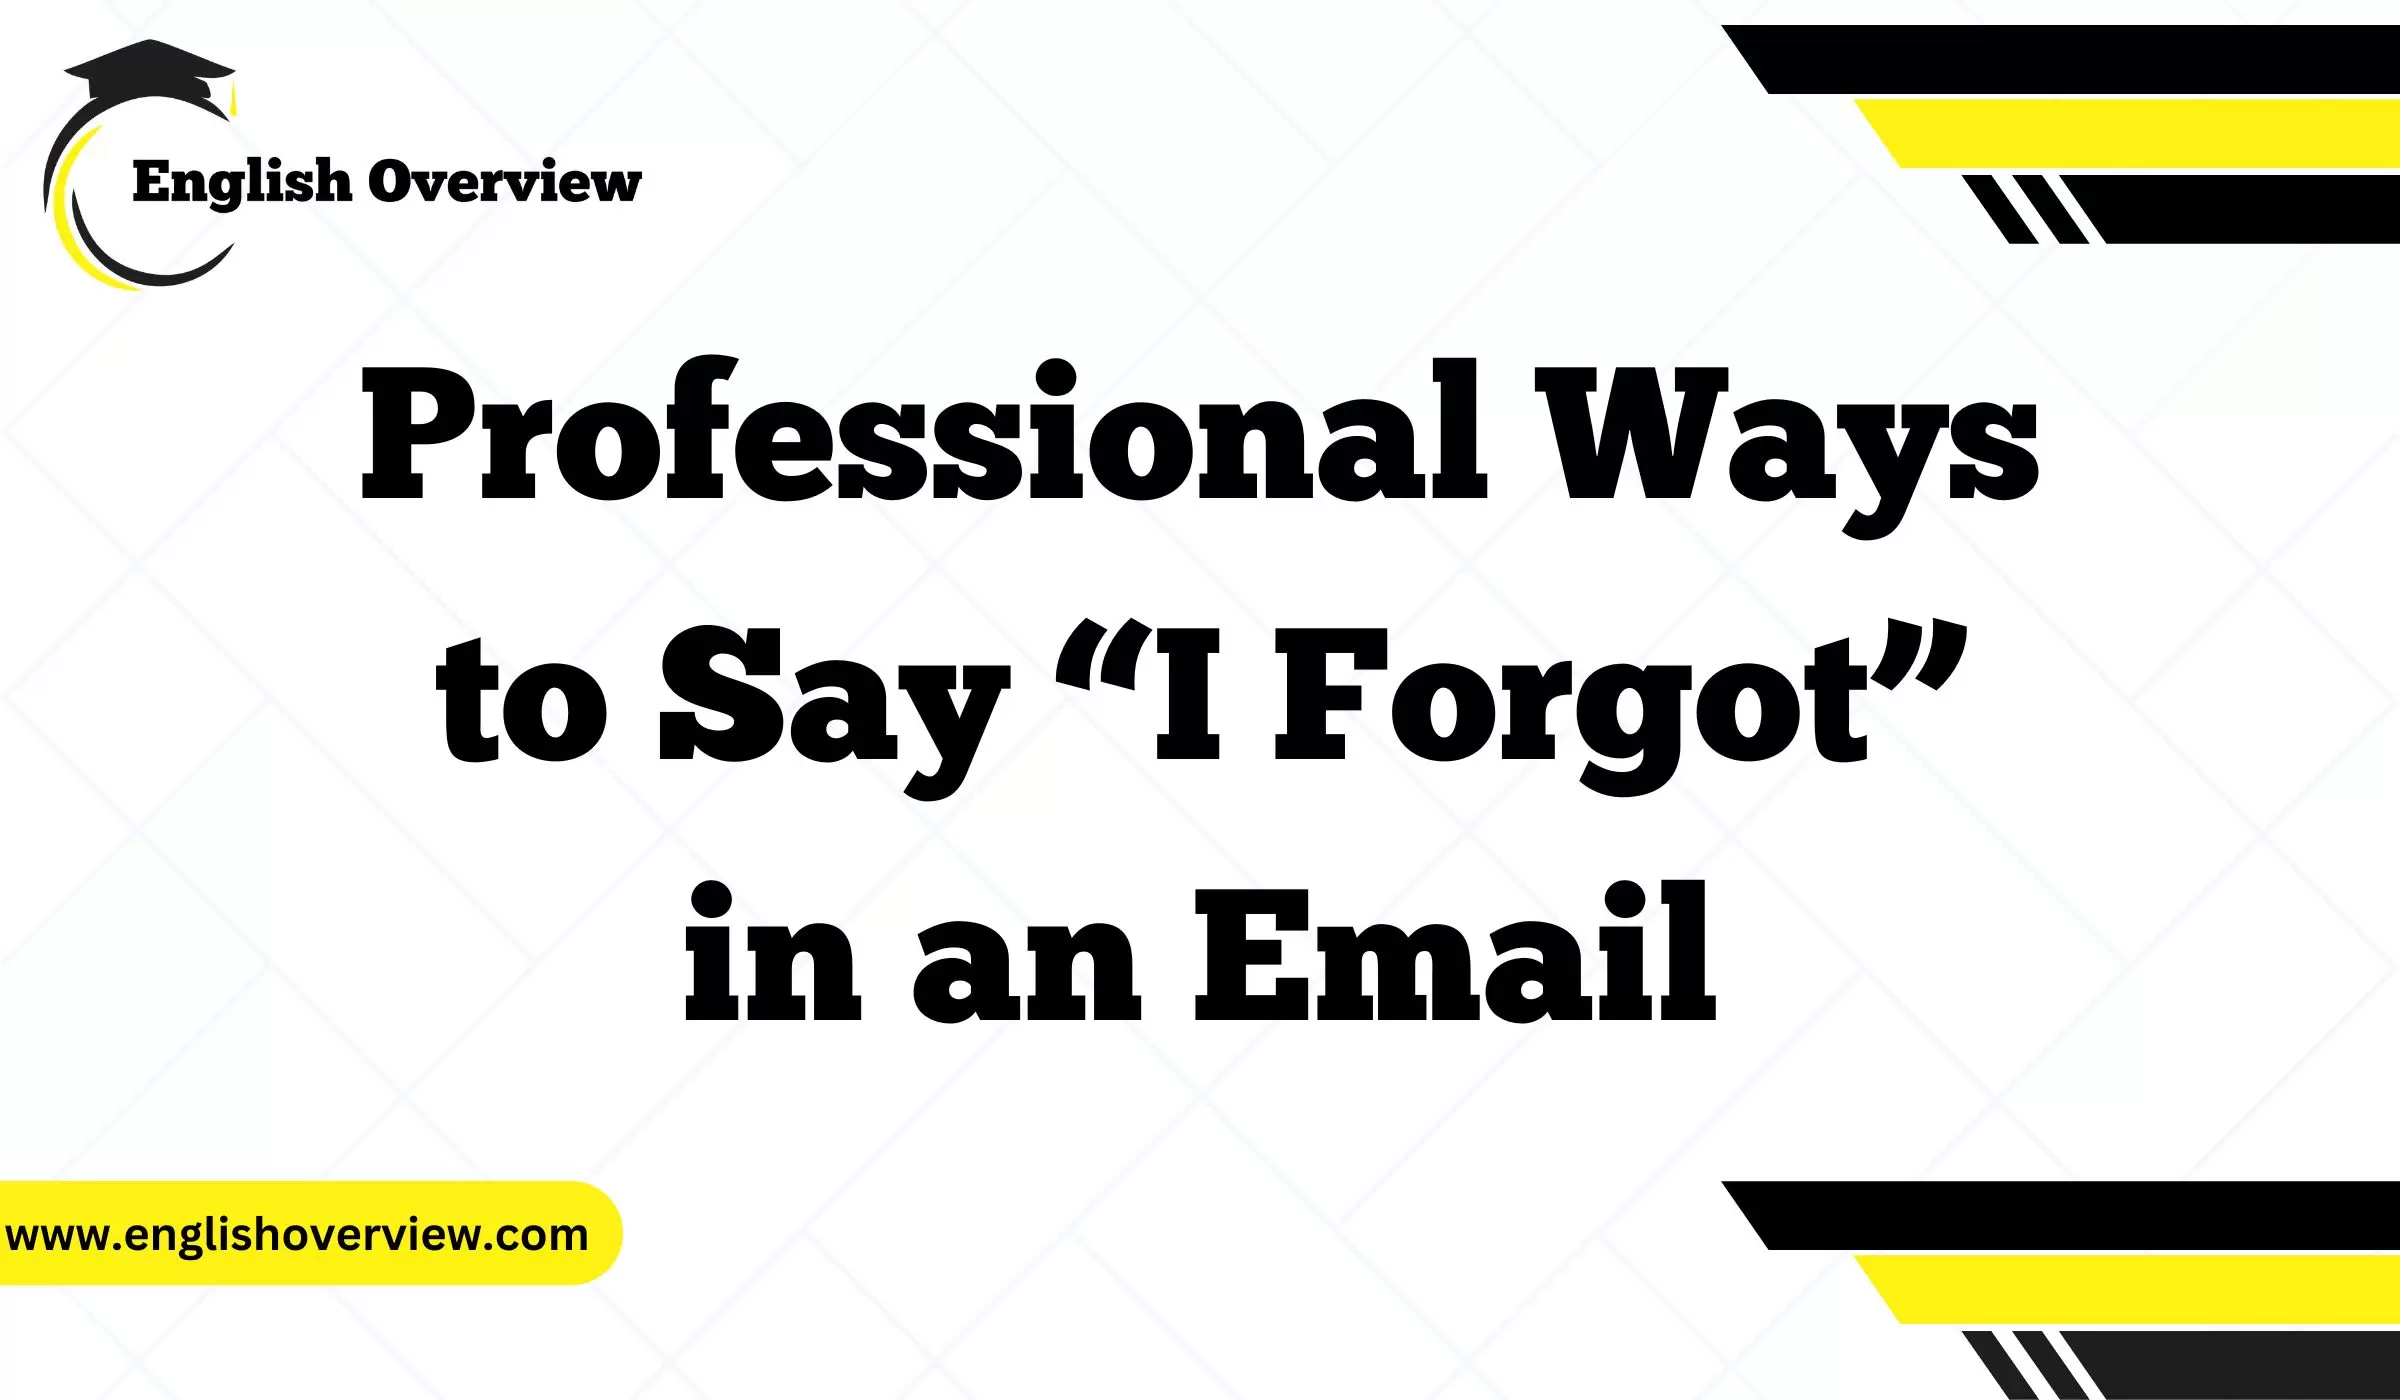 Professional Ways to Say “I Forgot” in an Email